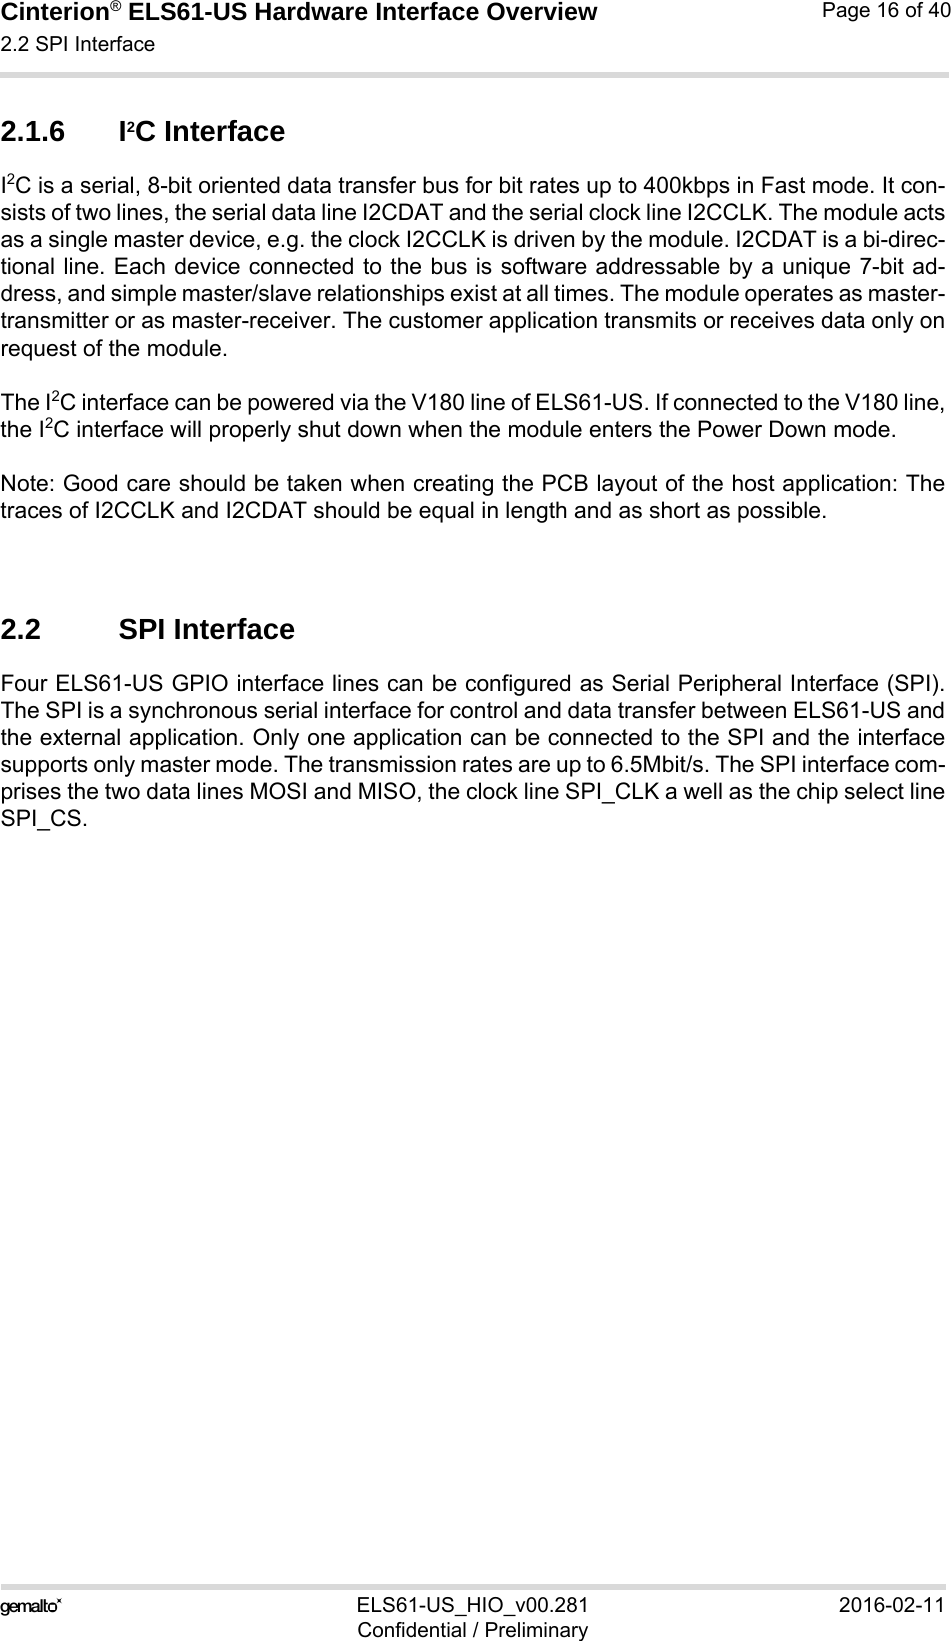 Cinterion® ELS61-US Hardware Interface Overview2.2 SPI Interface21ELS61-US_HIO_v00.281 2016-02-11Confidential / PreliminaryPage 16 of 402.1.6 I2C InterfaceI2C is a serial, 8-bit oriented data transfer bus for bit rates up to 400kbps in Fast mode. It con-sists of two lines, the serial data line I2CDAT and the serial clock line I2CCLK. The module actsas a single master device, e.g. the clock I2CCLK is driven by the module. I2CDAT is a bi-direc-tional line. Each device connected to the bus is software addressable by a unique 7-bit ad-dress, and simple master/slave relationships exist at all times. The module operates as master-transmitter or as master-receiver. The customer application transmits or receives data only onrequest of the module.The I2C interface can be powered via the V180 line of ELS61-US. If connected to the V180 line,the I2C interface will properly shut down when the module enters the Power Down mode.Note: Good care should be taken when creating the PCB layout of the host application: Thetraces of I2CCLK and I2CDAT should be equal in length and as short as possible.2.2 SPI InterfaceFour ELS61-US GPIO interface lines can be configured as Serial Peripheral Interface (SPI).The SPI is a synchronous serial interface for control and data transfer between ELS61-US andthe external application. Only one application can be connected to the SPI and the interfacesupports only master mode. The transmission rates are up to 6.5Mbit/s. The SPI interface com-prises the two data lines MOSI and MISO, the clock line SPI_CLK a well as the chip select lineSPI_CS.